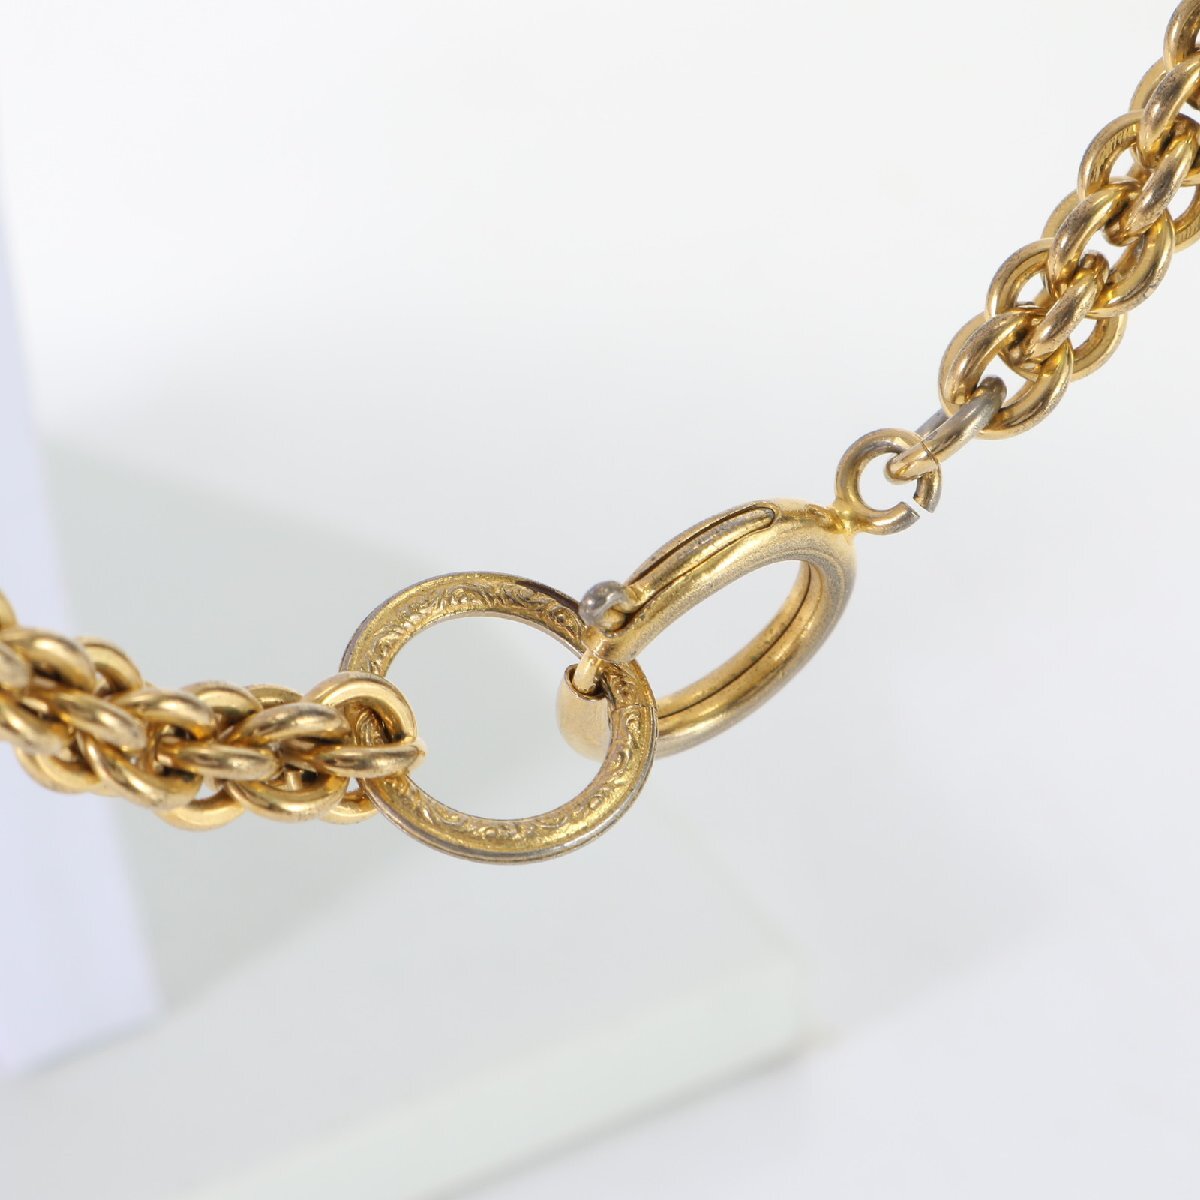 1 jpy # beautiful goods # Vintage # Chanel # here Mark chain lamp body accessory necklace Gold lady's men's MHM J6-5